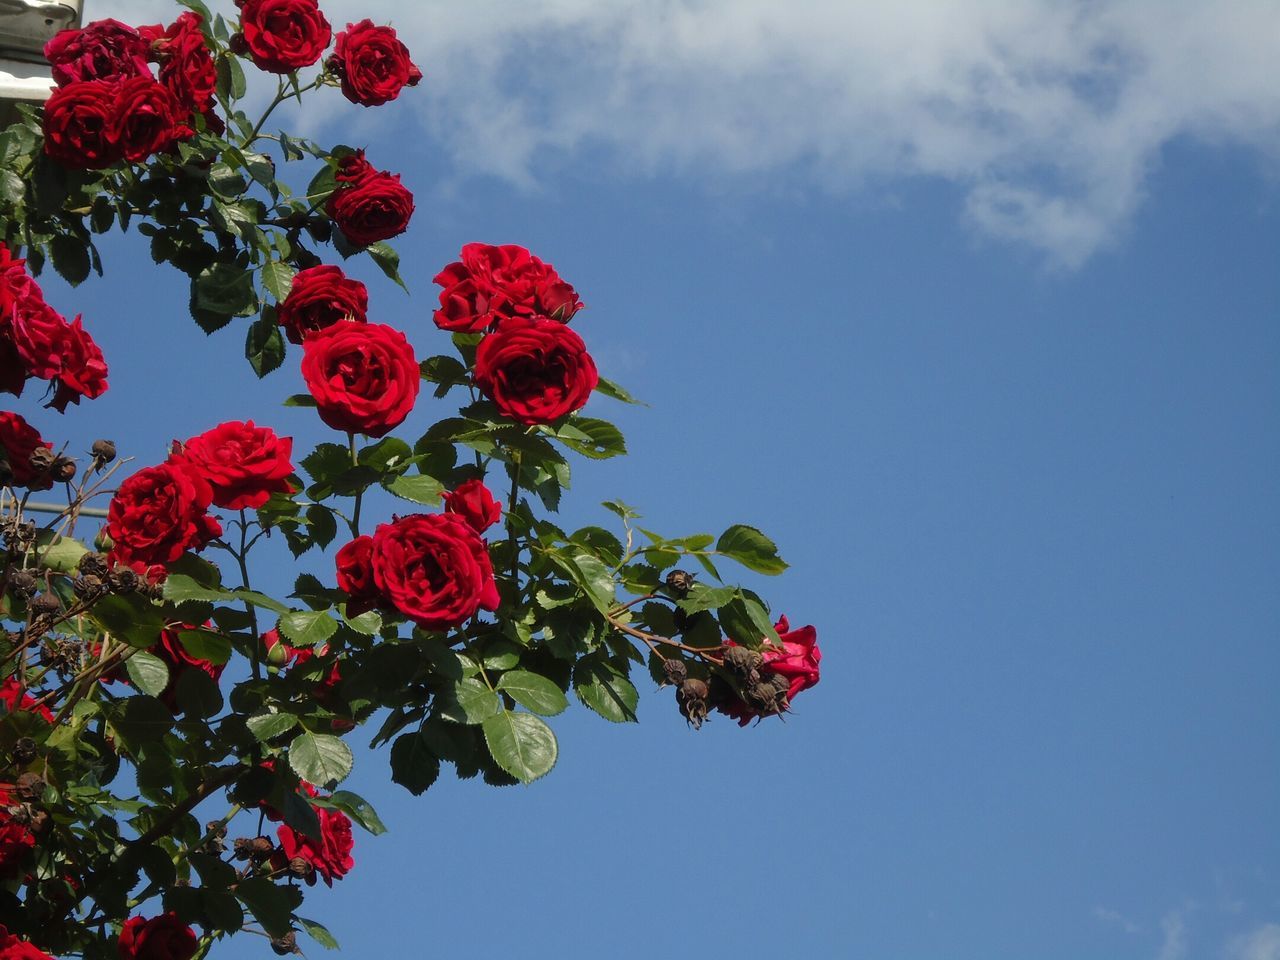 The roses & sky